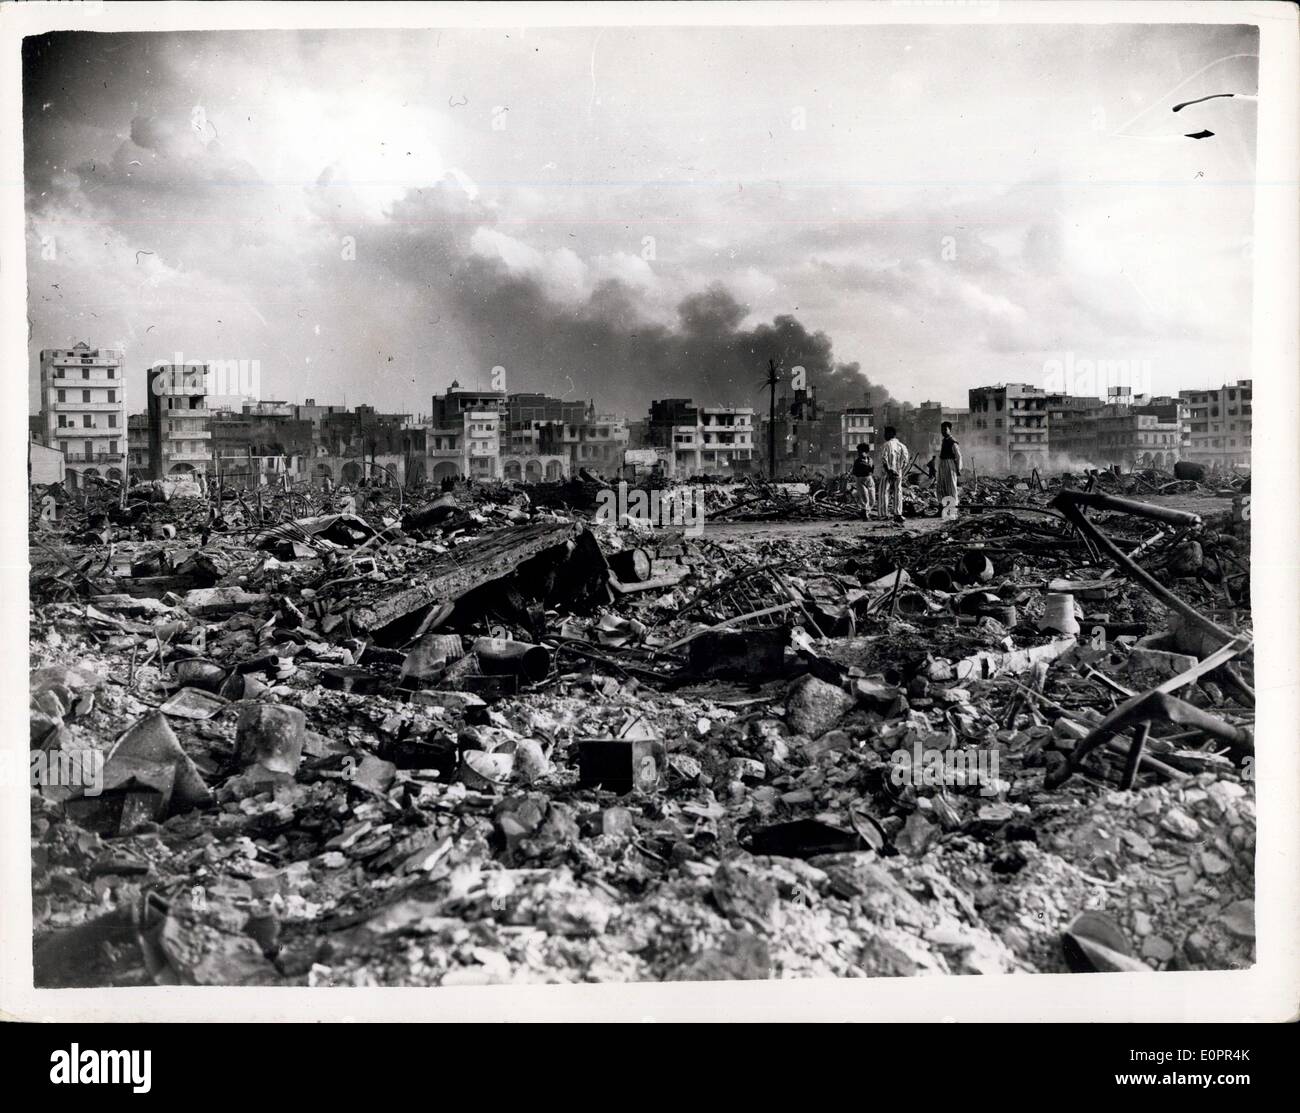 Nov. 08, 1956 - The Suez Crisis. Anglo-French Troops Occupy Port Said. Photo Shows: Part of the Arab town that had been partly burned by fire. Stock Photo